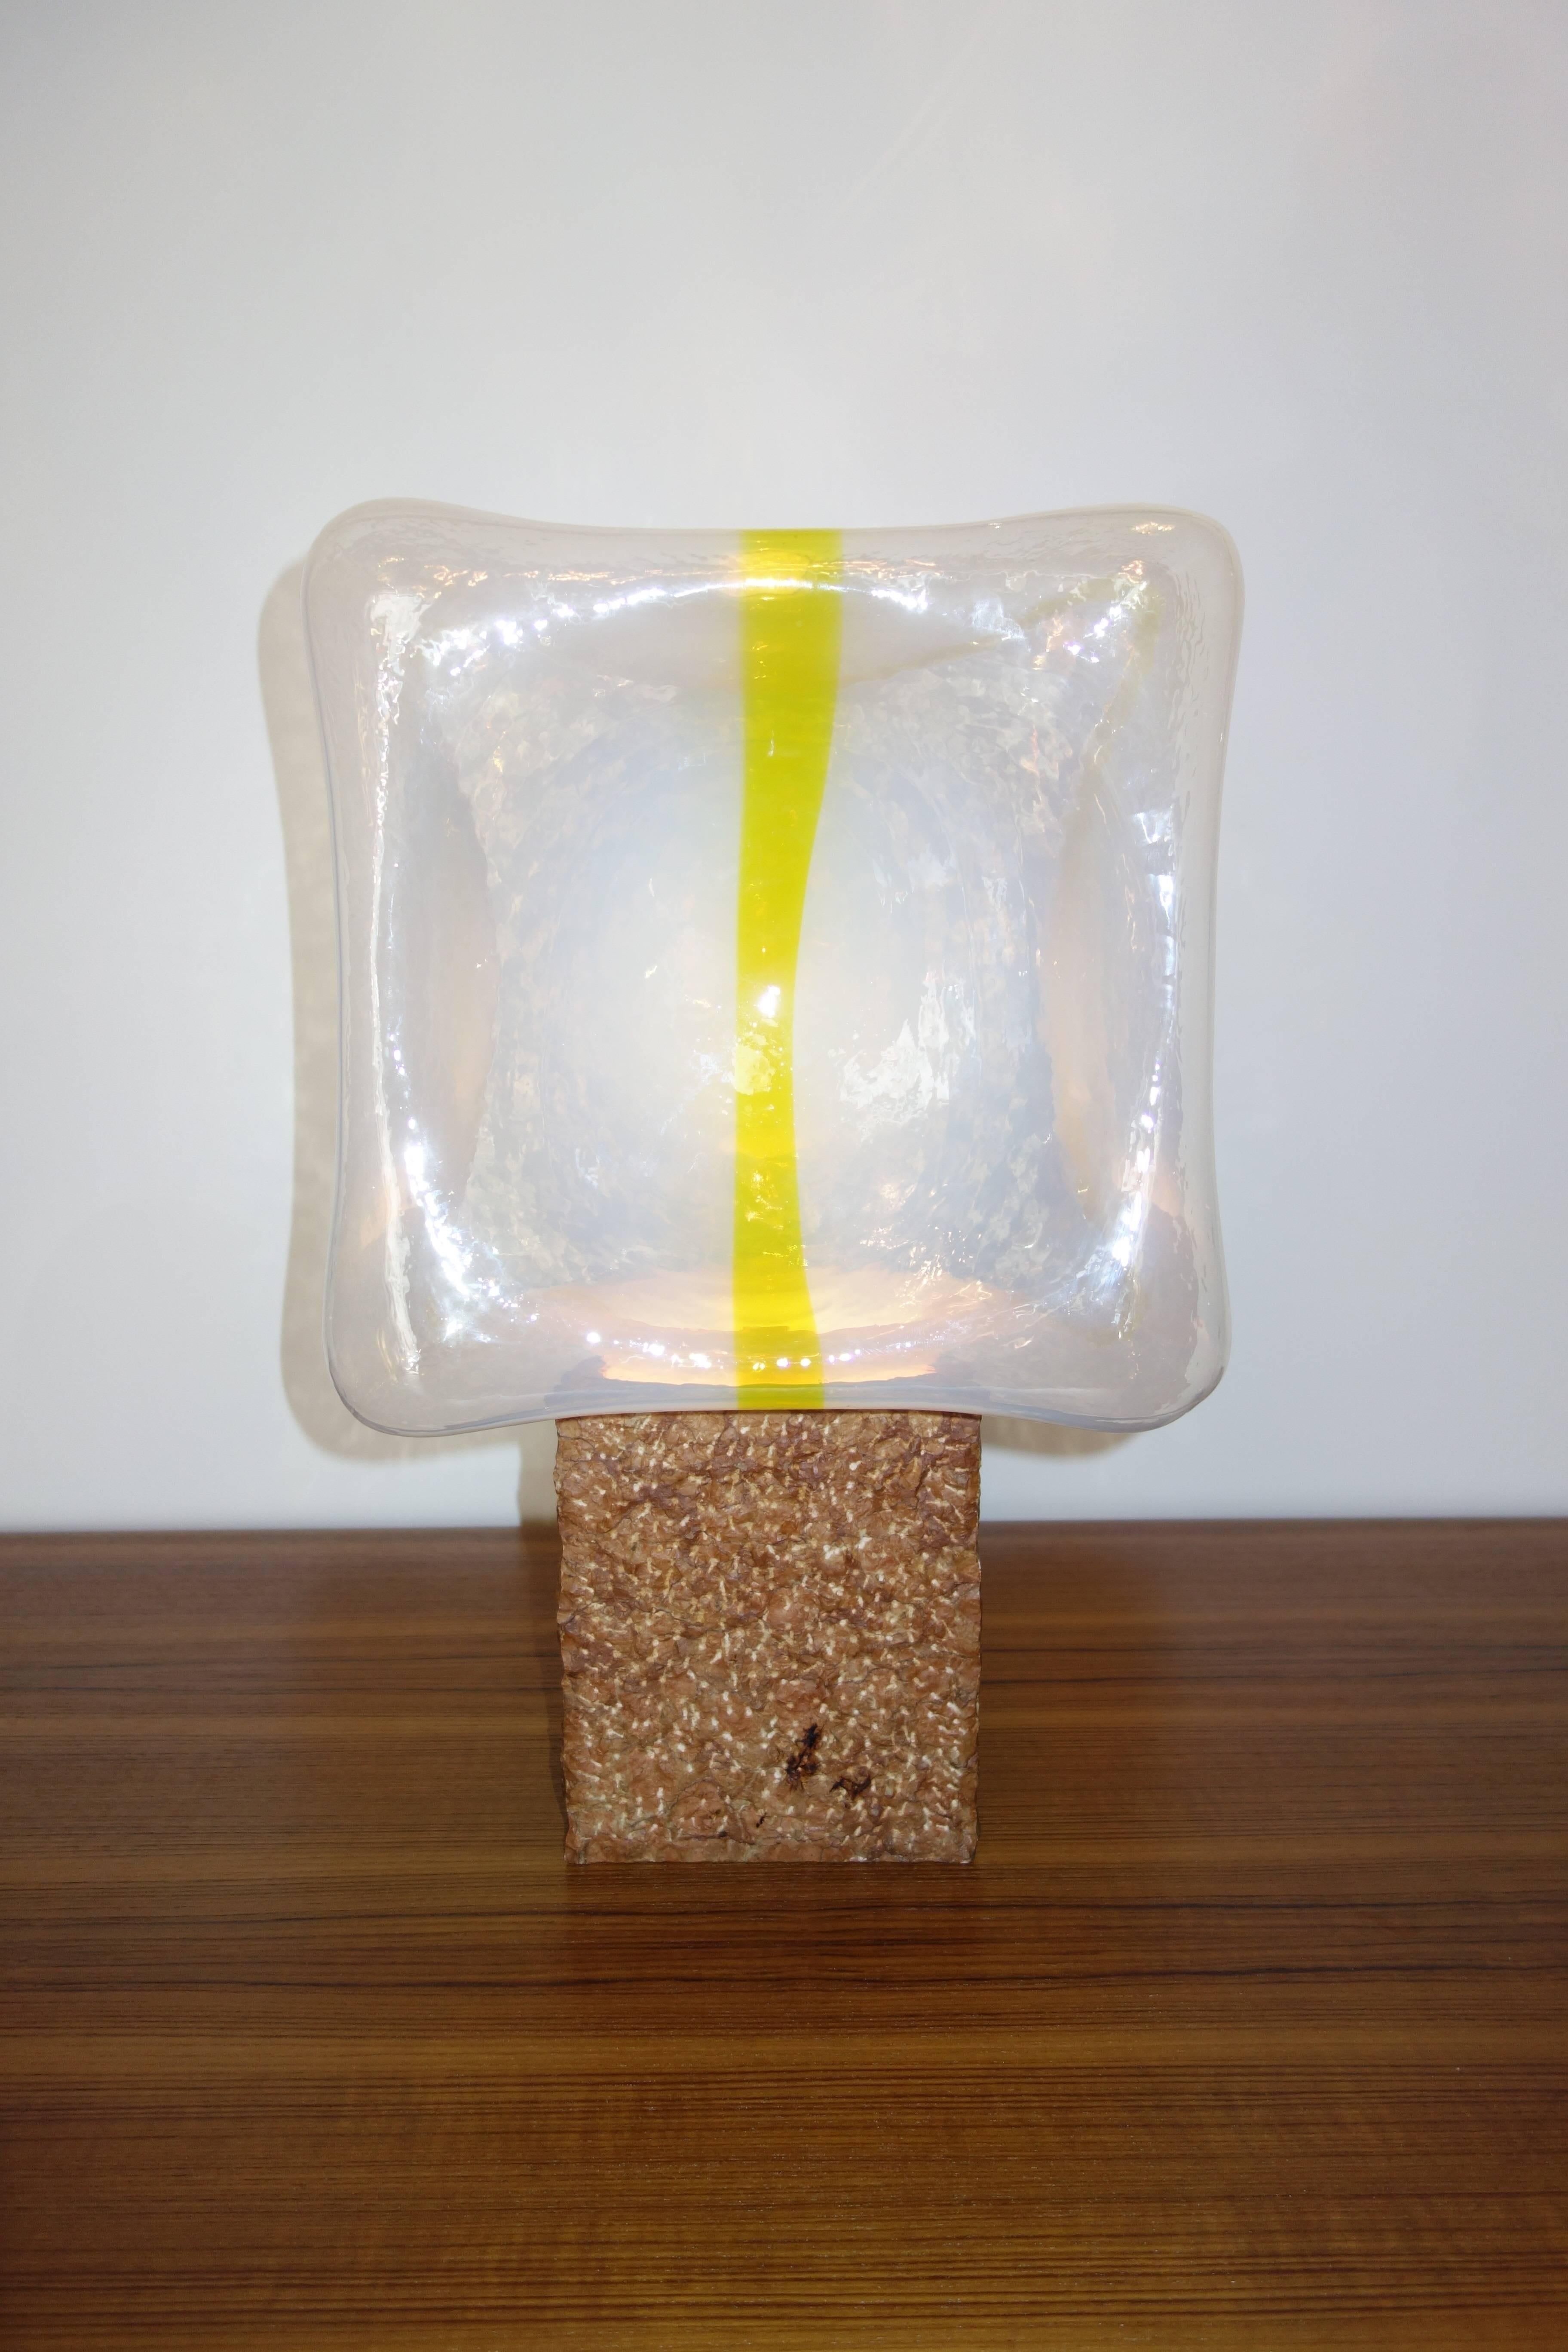 Sierra lamp by Roberto Pamio and Renato Toso for Leucos. Made in Italy in 1975. Verona marble square pedestal and blown blue Murano glass with yellow lines. Rare model for sale, craft piece of time manufactured in small quantities.